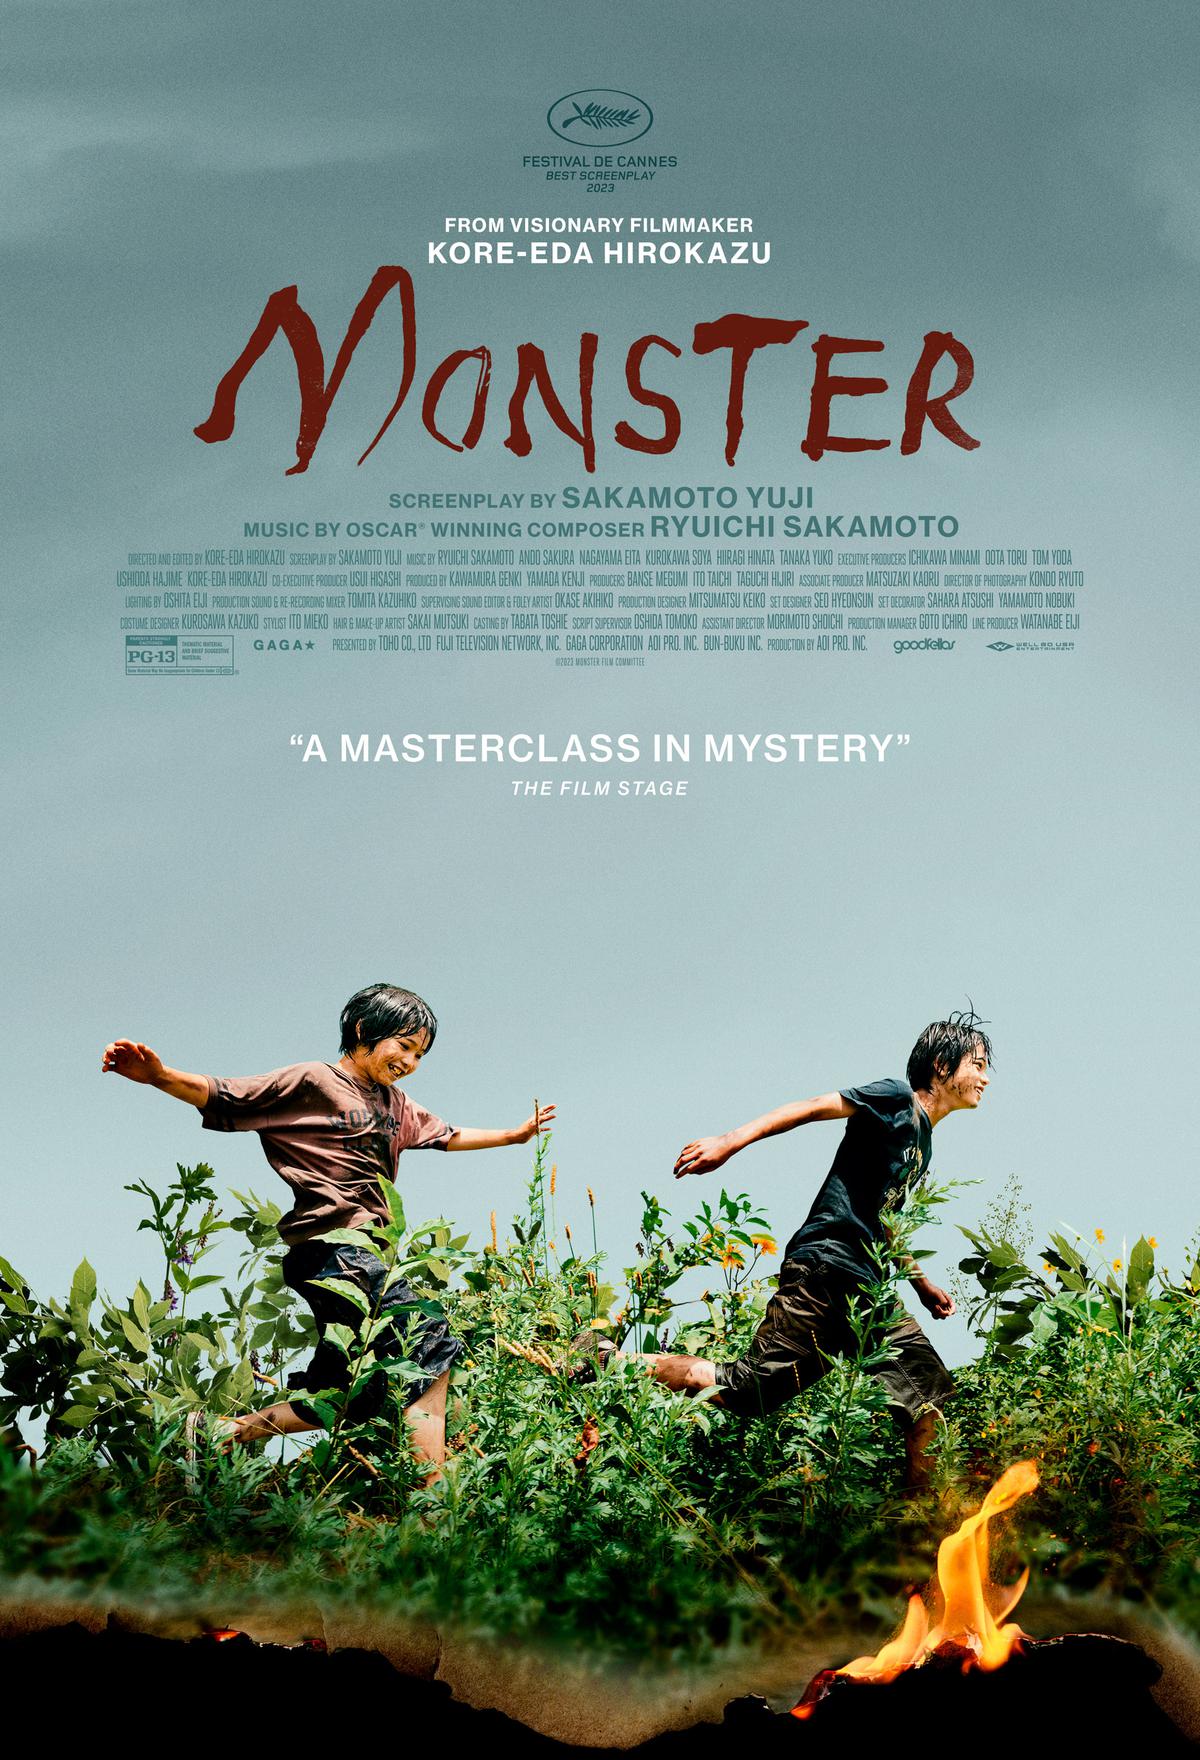 The official poster of ‘Monster’